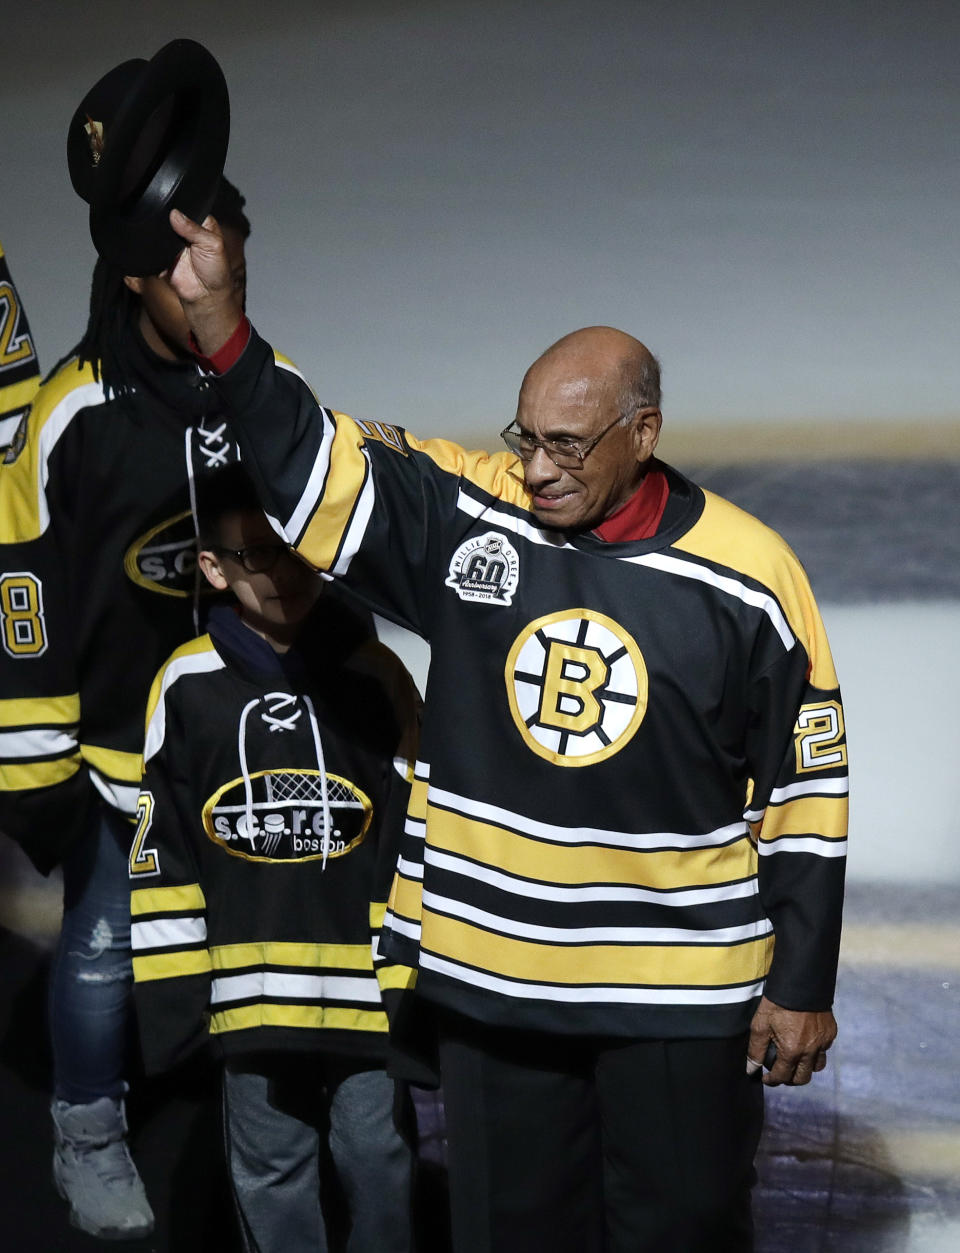 FILE - Former Boston Bruins' Willie O'Ree tips his hat as he is honored prior to the first period of an NHL hockey game against the Montreal Canadiens in Boston, Wednesday, Jan. 17, 2018. O'Ree says the ongoing pandemic hasn't diminished what he says will be a "simply amazing" honor watching his No. 22 jersey retired by the Bruins. O'Ree, who broke the NHL's color barrier on Jan. 18, 1958, was slated to attend when he became the 12th player in team history to have his number retired prior to Boston's game against Carolina on Tuesday, Jan. 18, 2022, But persisting concerns about the pandemic changed those plans. He will now participate from his home in San Diego.(AP Photo/Charles Krupa, File)